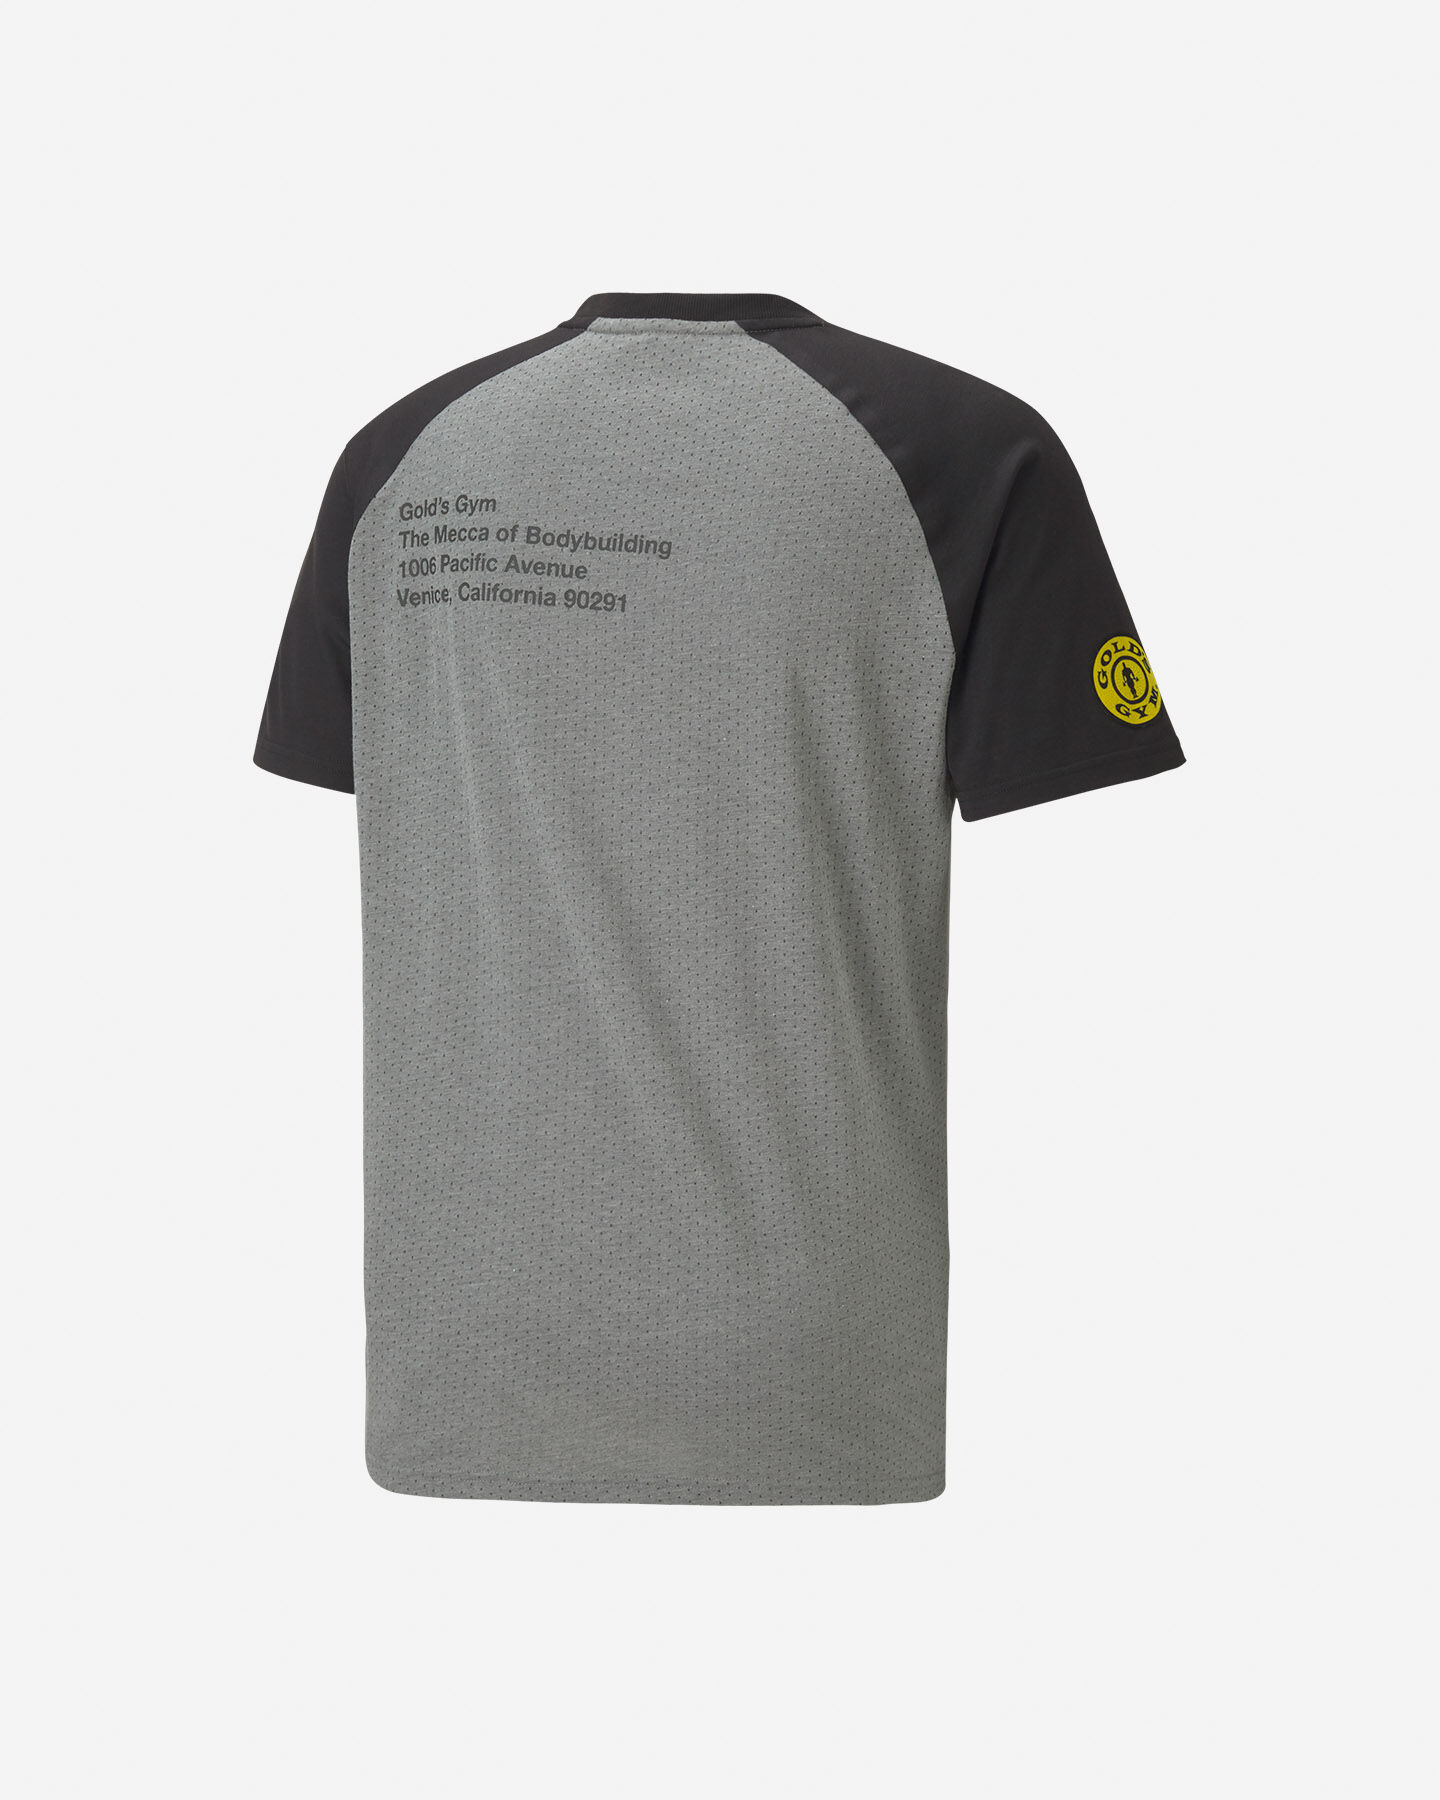  T-Shirt PUMA GOLD'S GYM M S5197190|01|S scatto 1